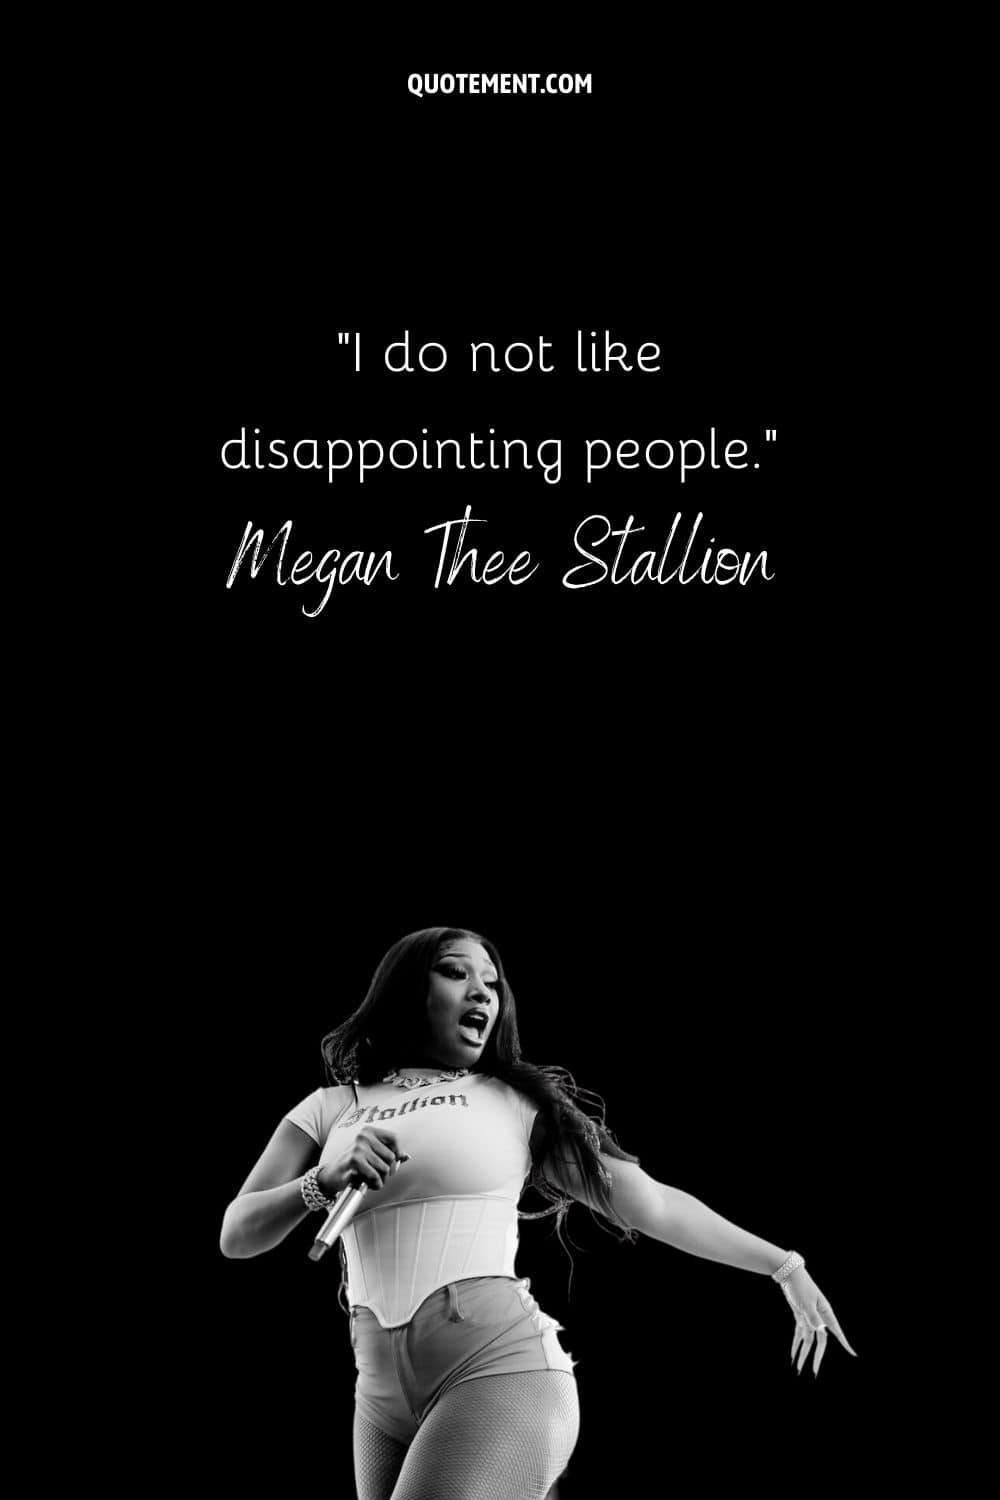 “I do not like disappointing people.” — Megan Thee Stallion